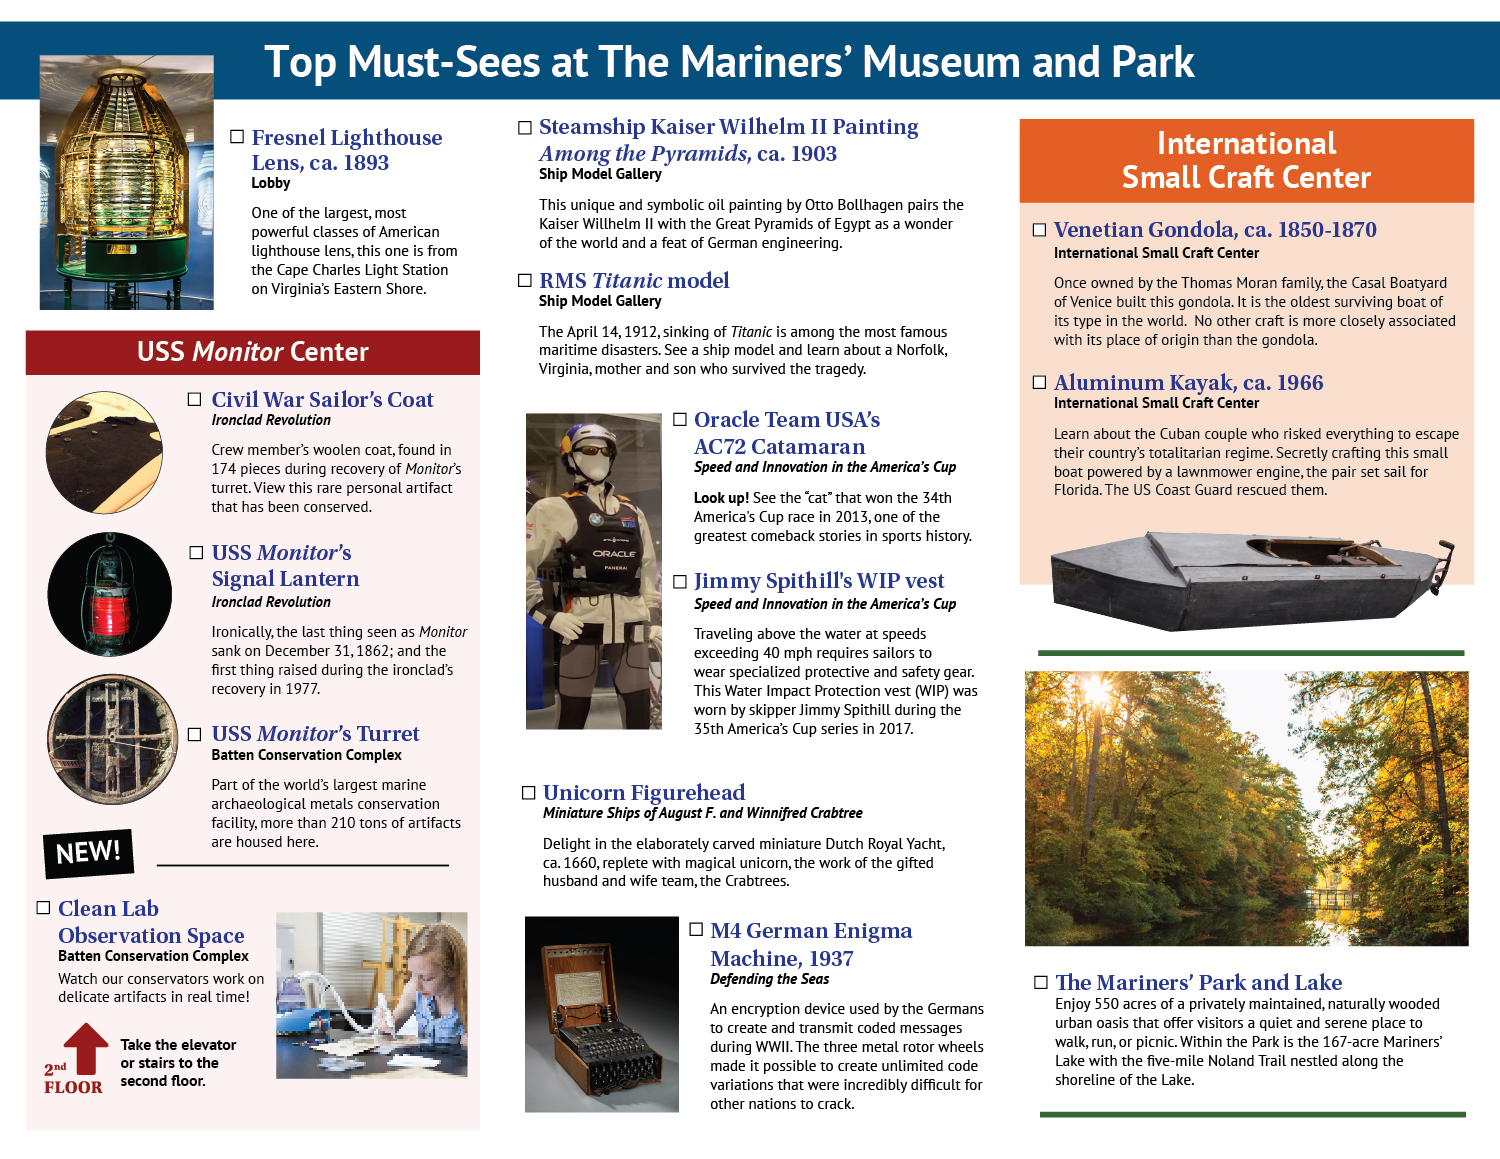 Flyer: Top Must Sees at The Mariners' Museum and Park